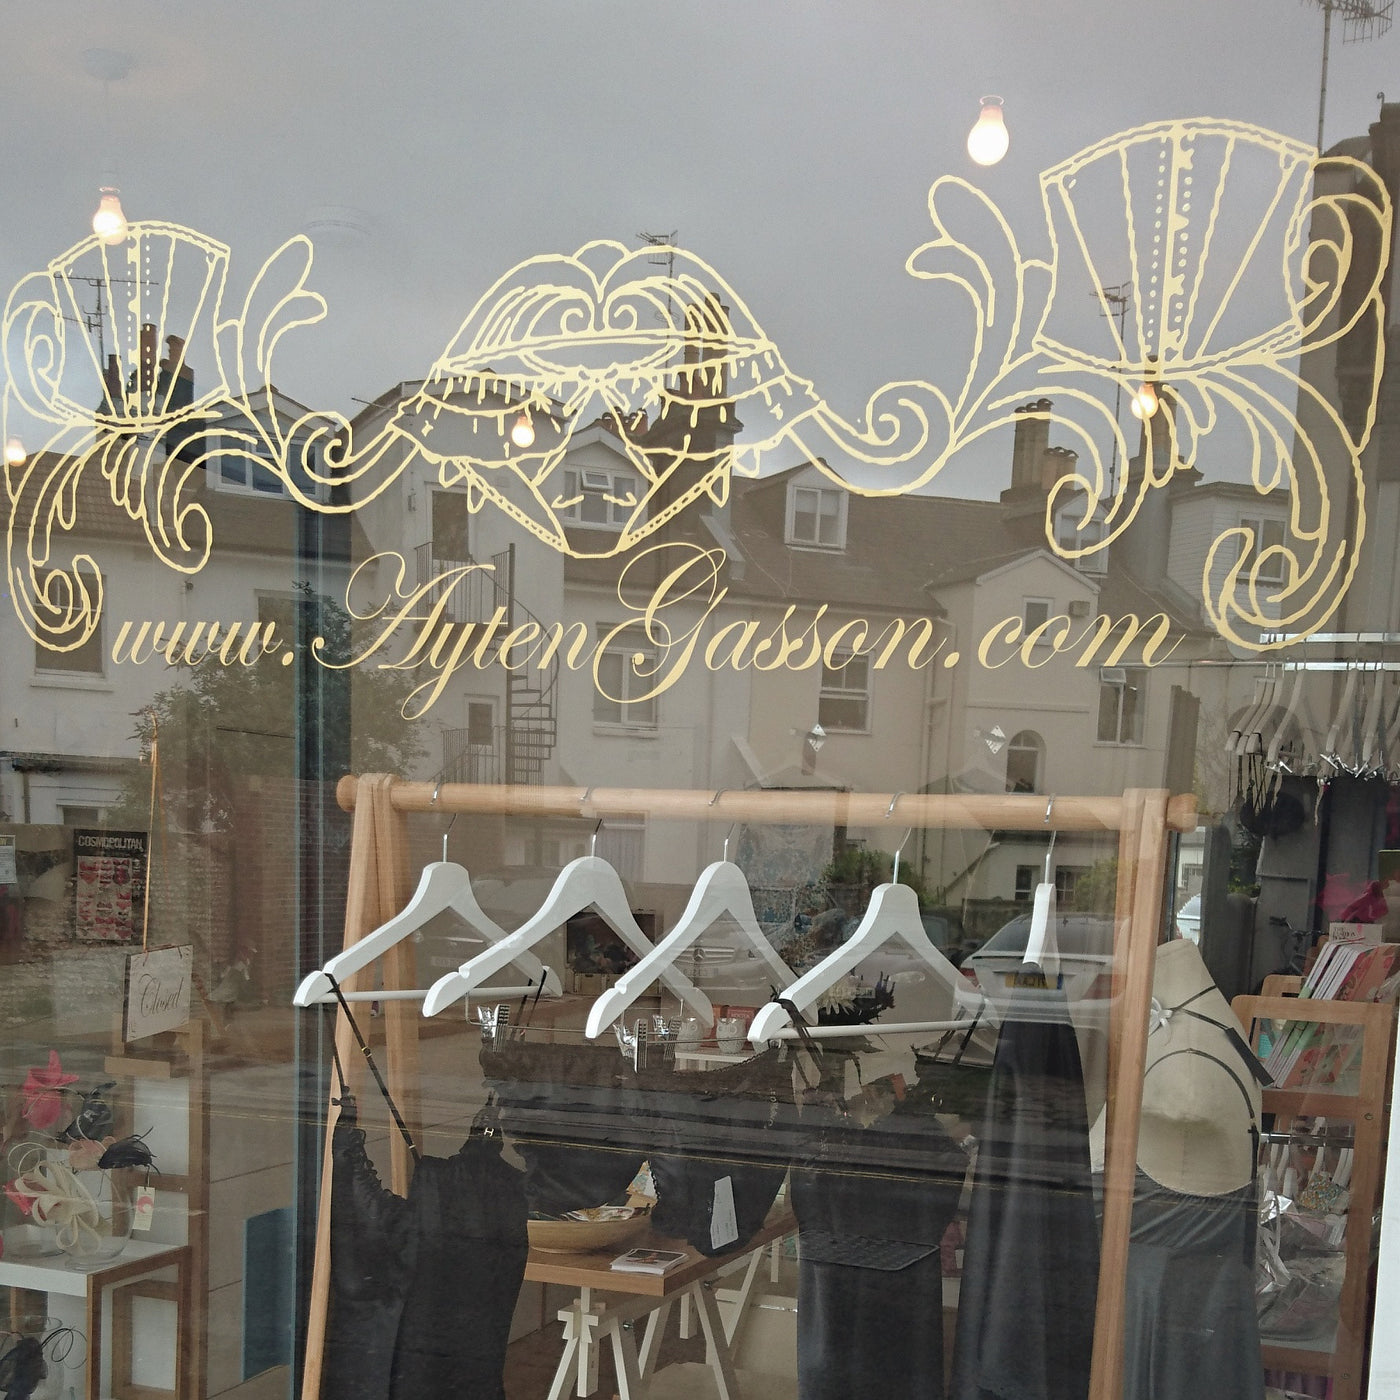 Introducing The Ayten Gasson Boutique In Brighton